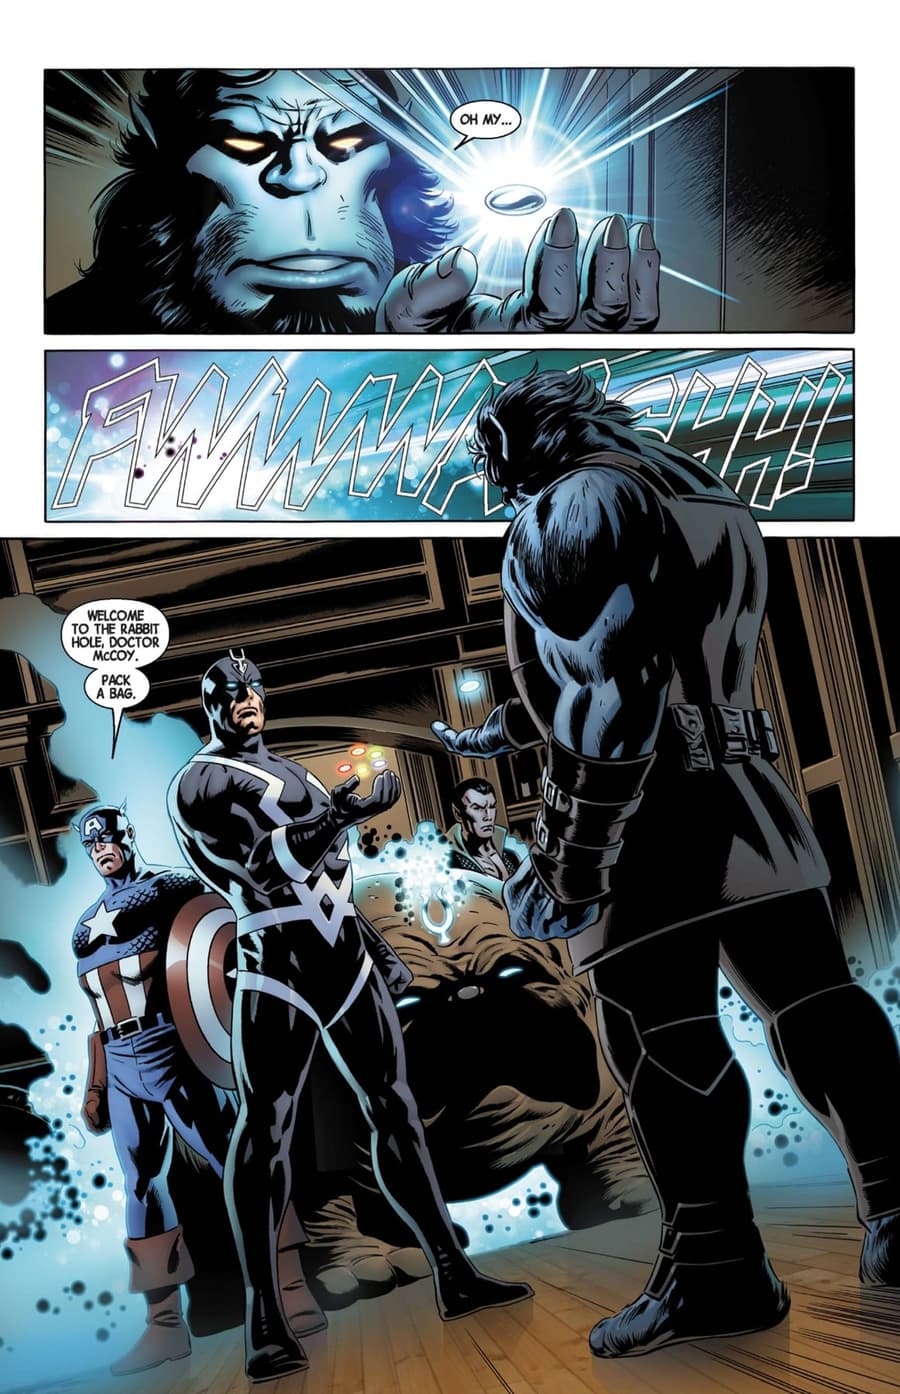 NEW AVENGERS (2013) #3 page by Jonathan Hickman and Steve Epting